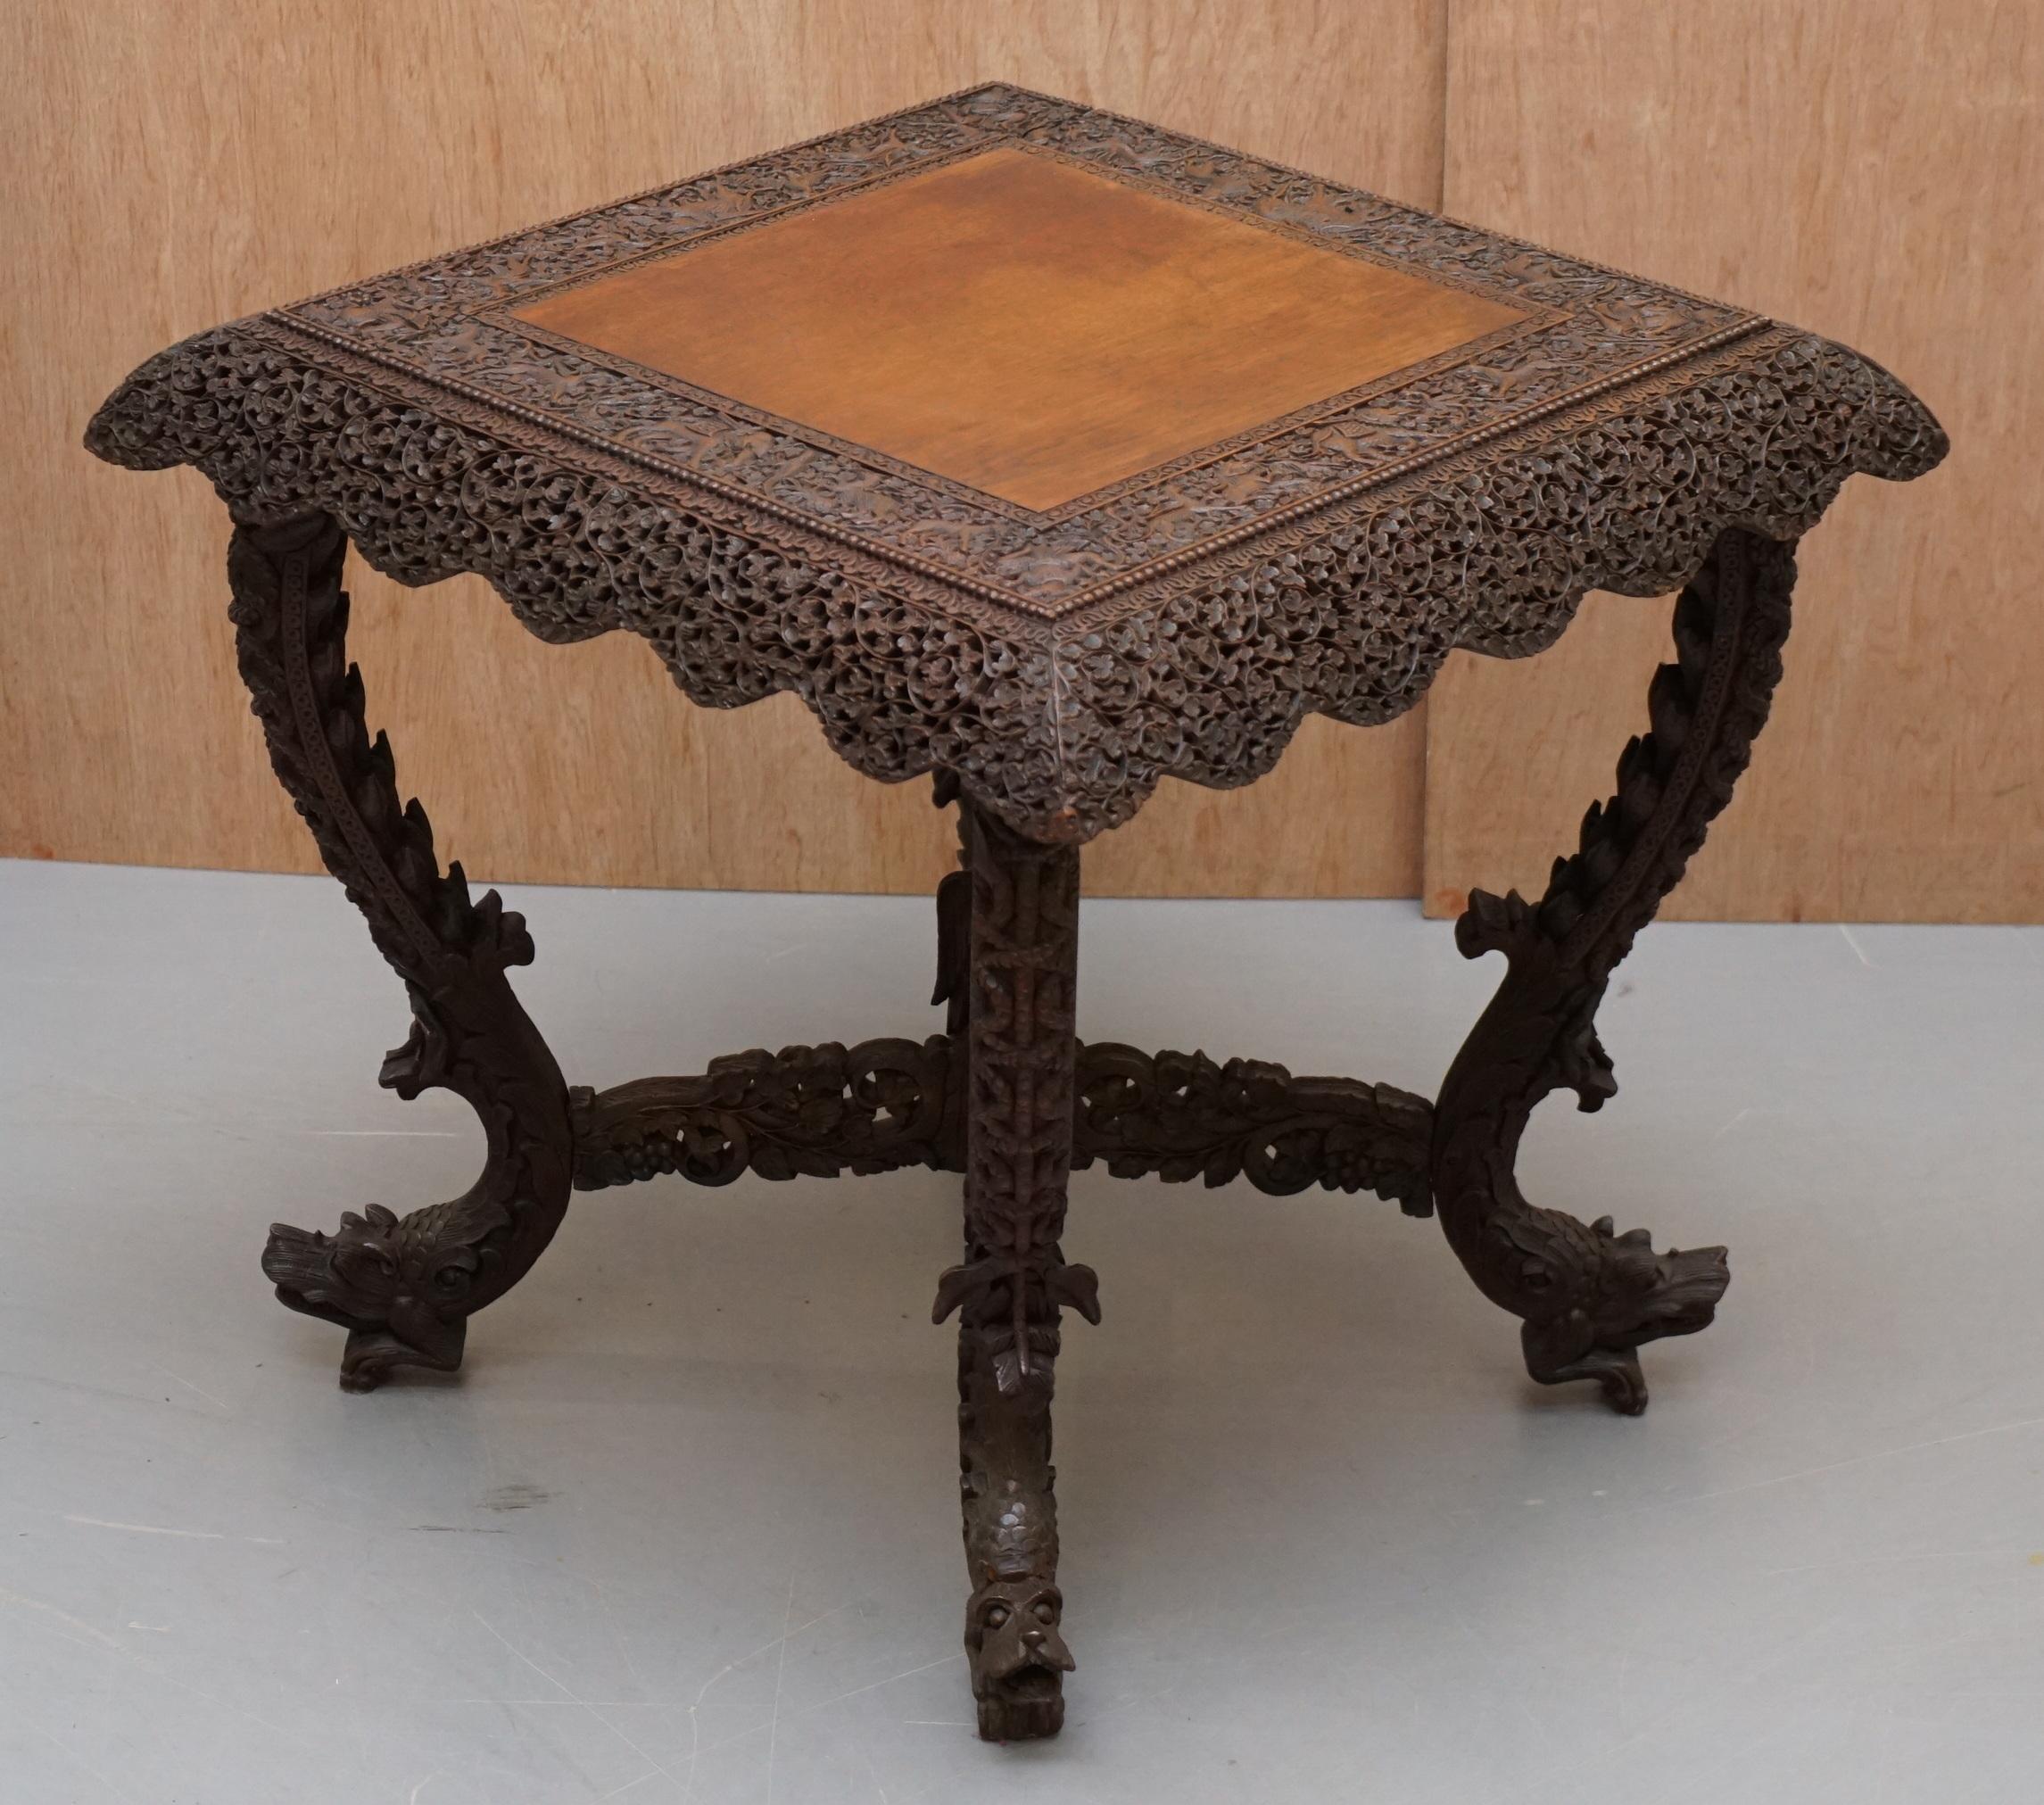 We are delighted to this is for an original solid Hardwood Anglo-Indian Burmese hand carved chair

A very rare find, I have a matching pair of chairs and various tables listed under my other items 

The condition is good, it has been restored to